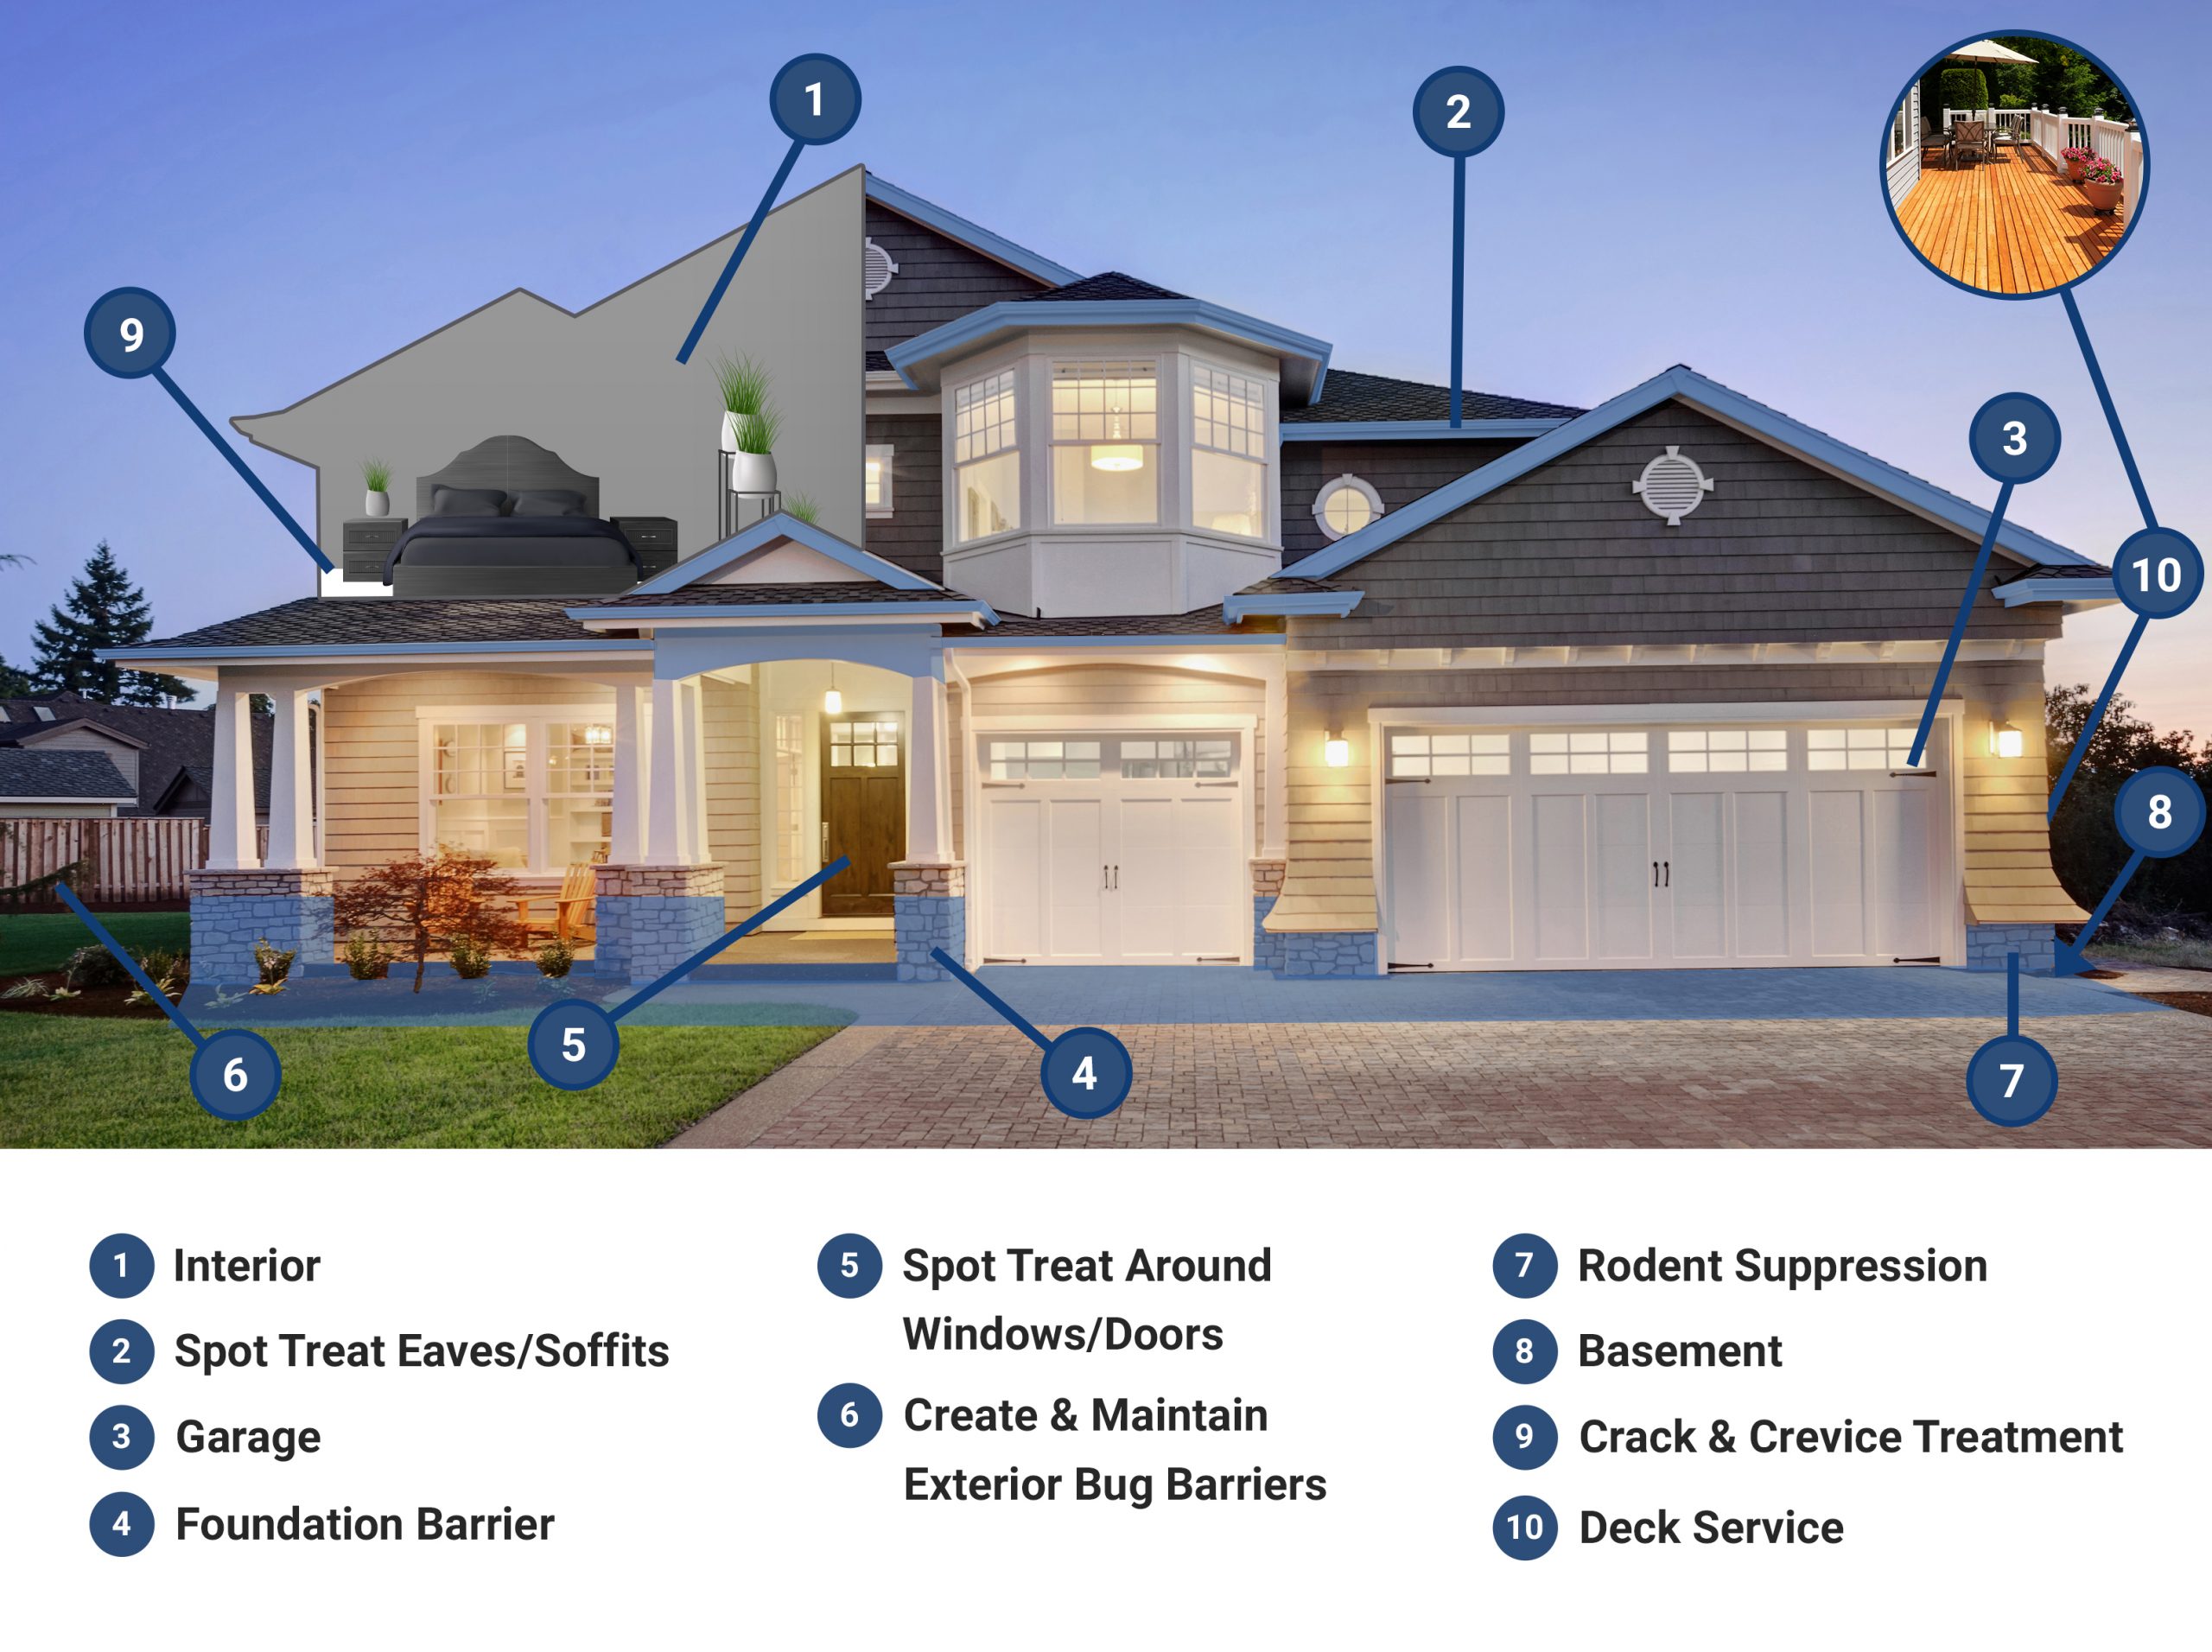 Image of House with areas where pest control is performed